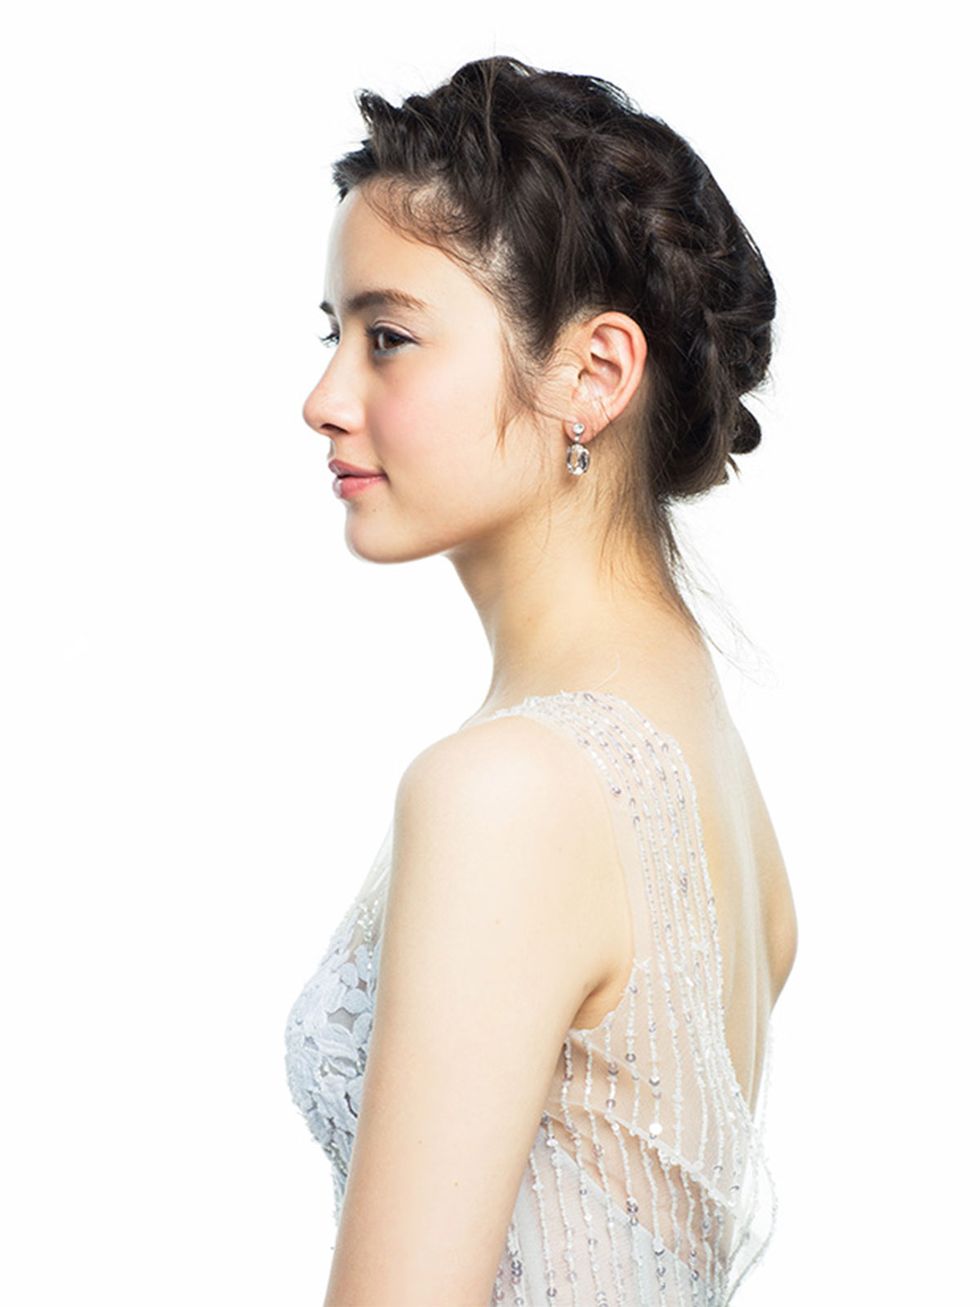 Hair, Hairstyle, Shoulder, Skin, Chin, Chignon, Beauty, Dress, Forehead, Neck, 